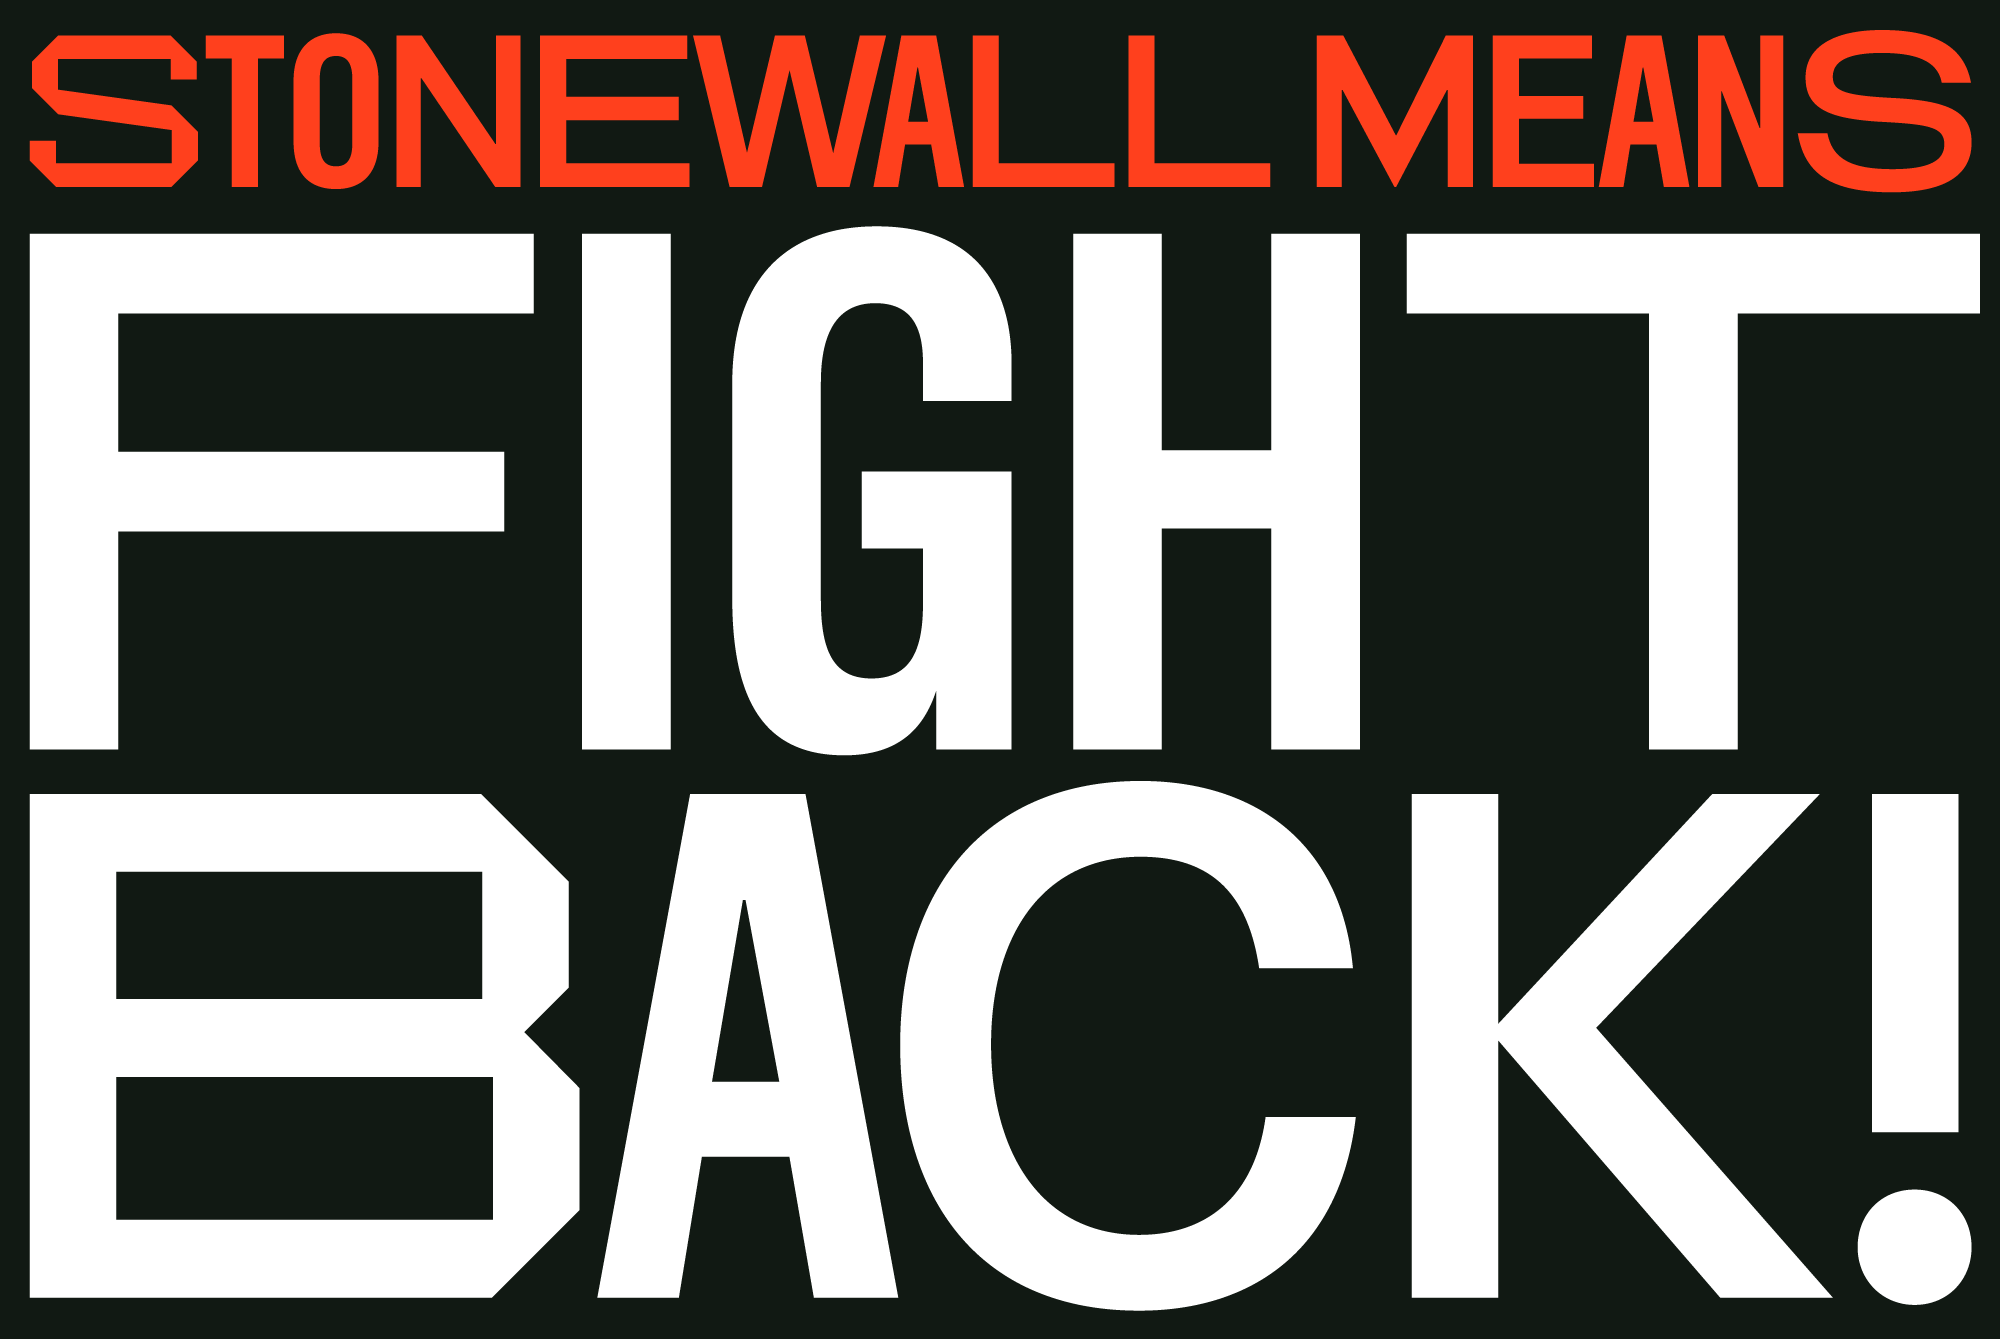 Cover image: Stonewall 50 Typeface